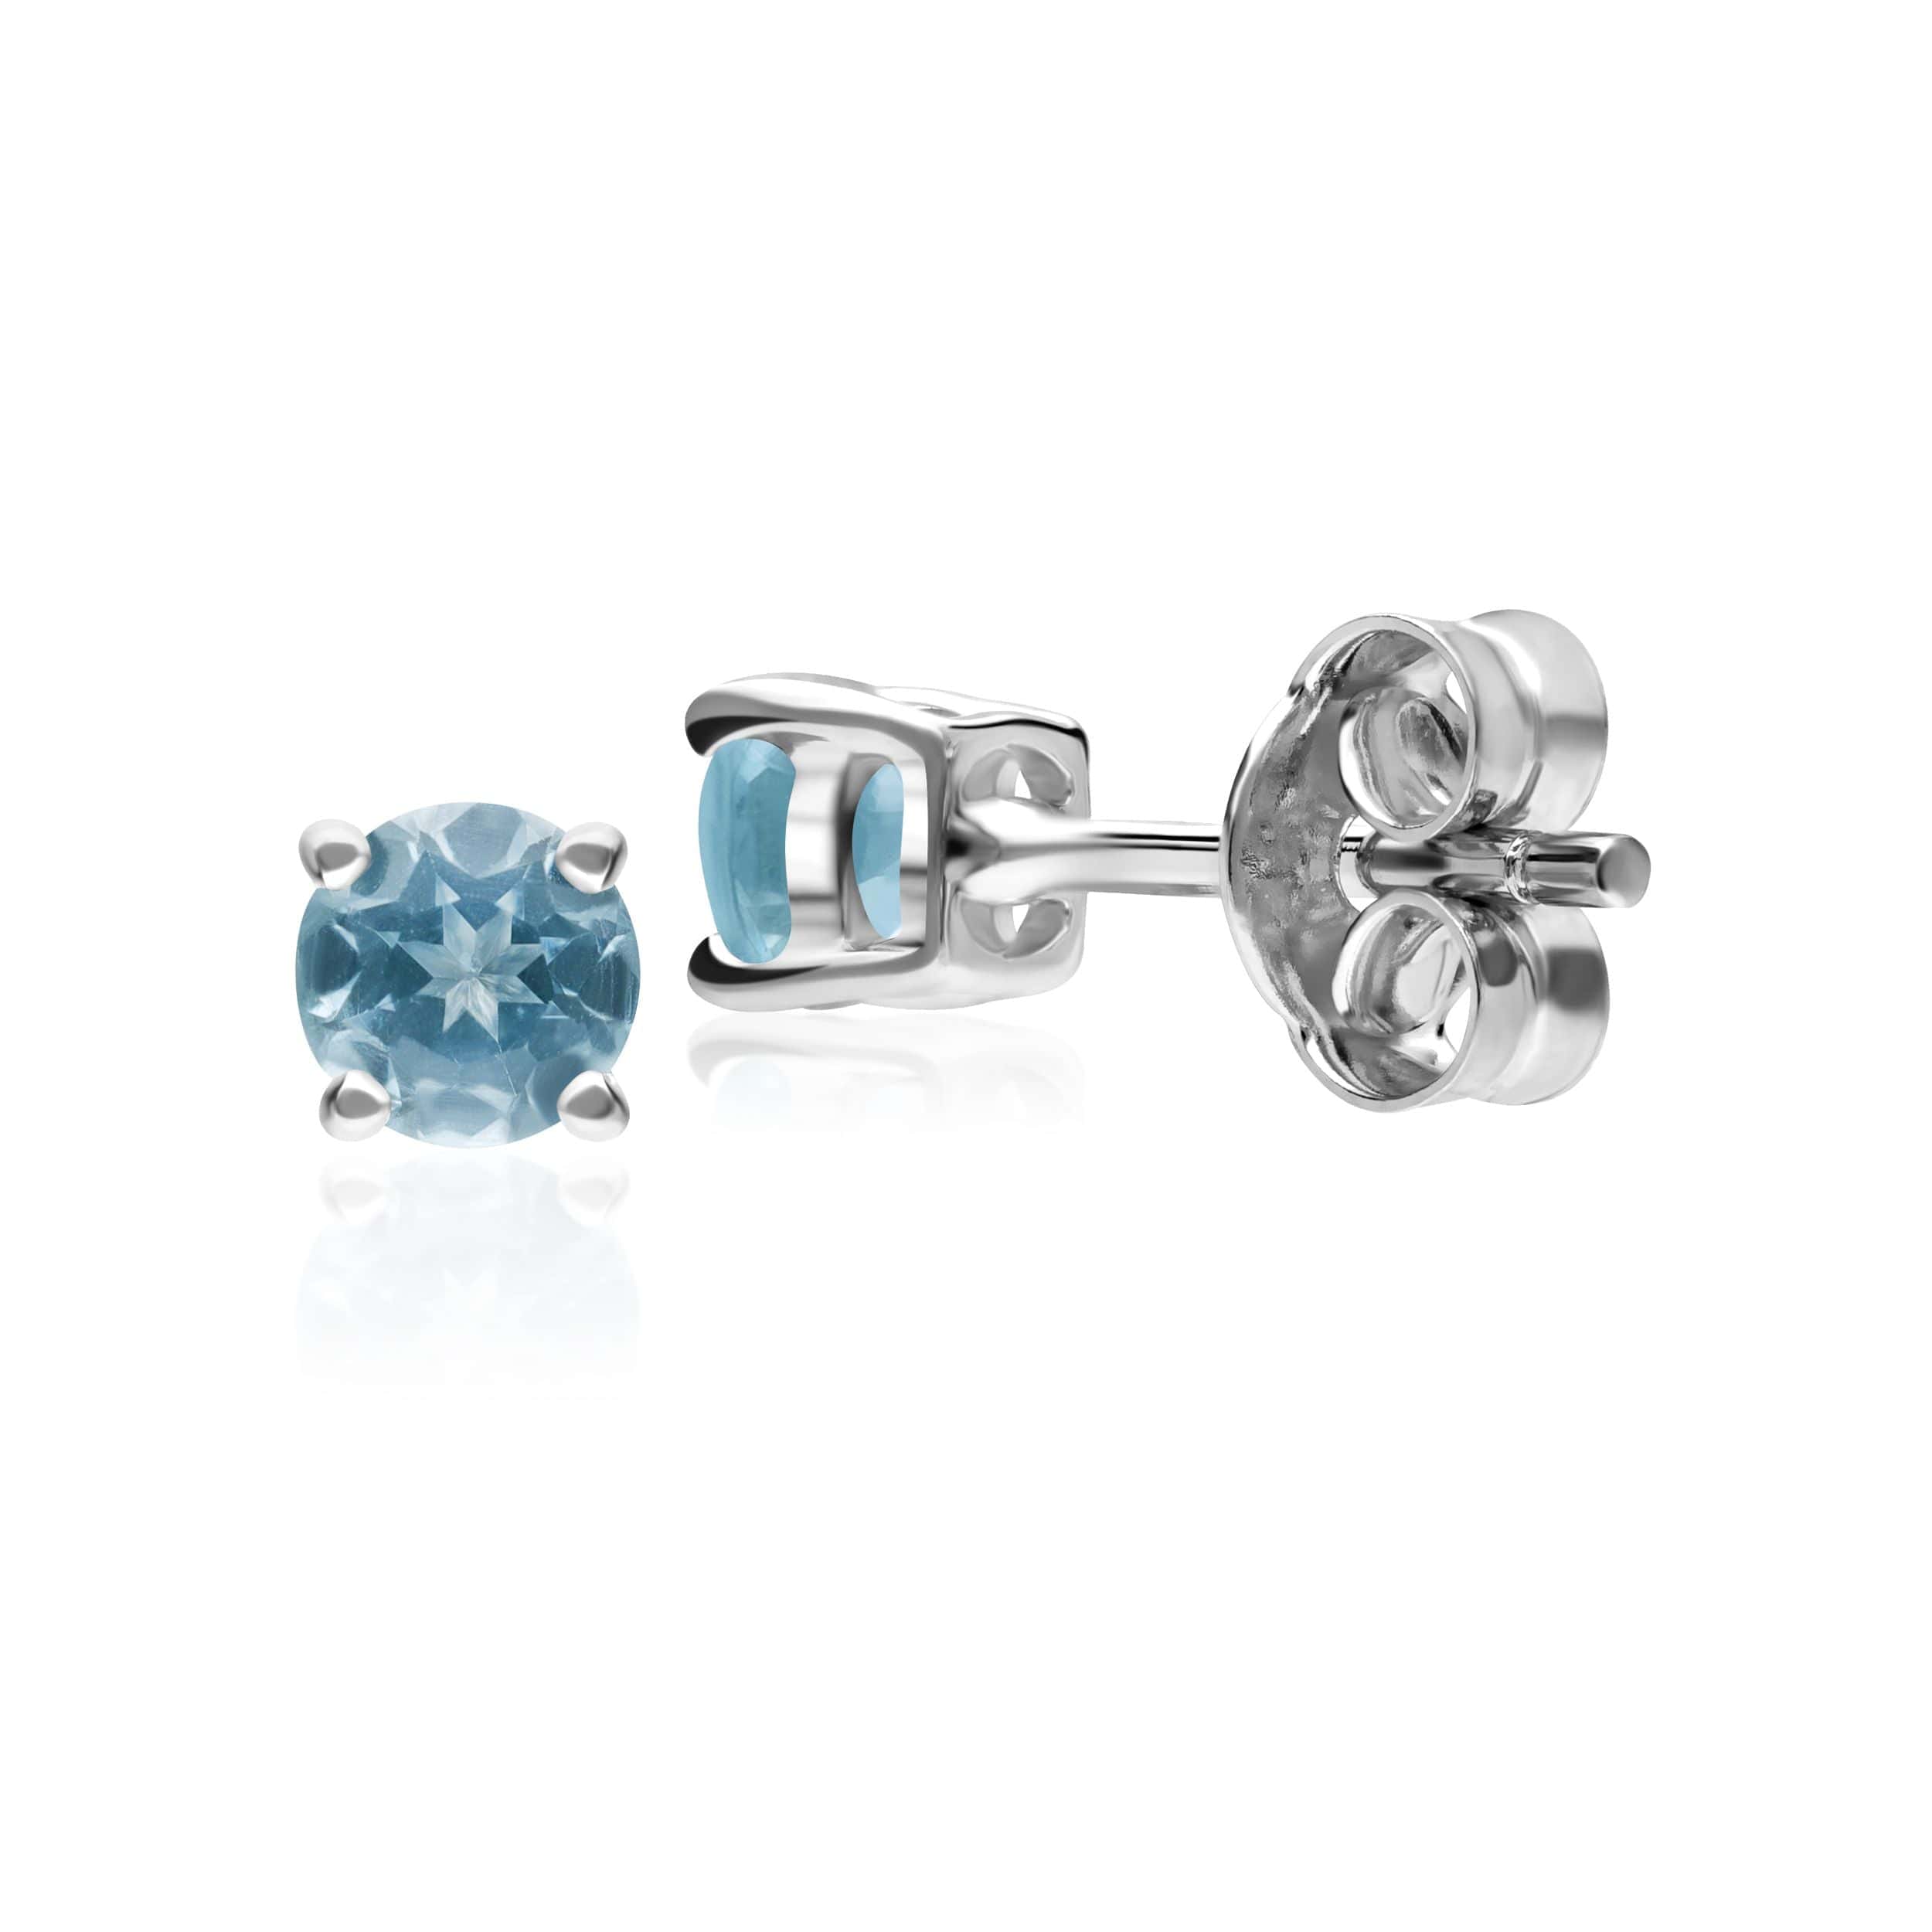 11623 Classic Round Blue Topaz Stud Earrings in 9ct White Gold 2